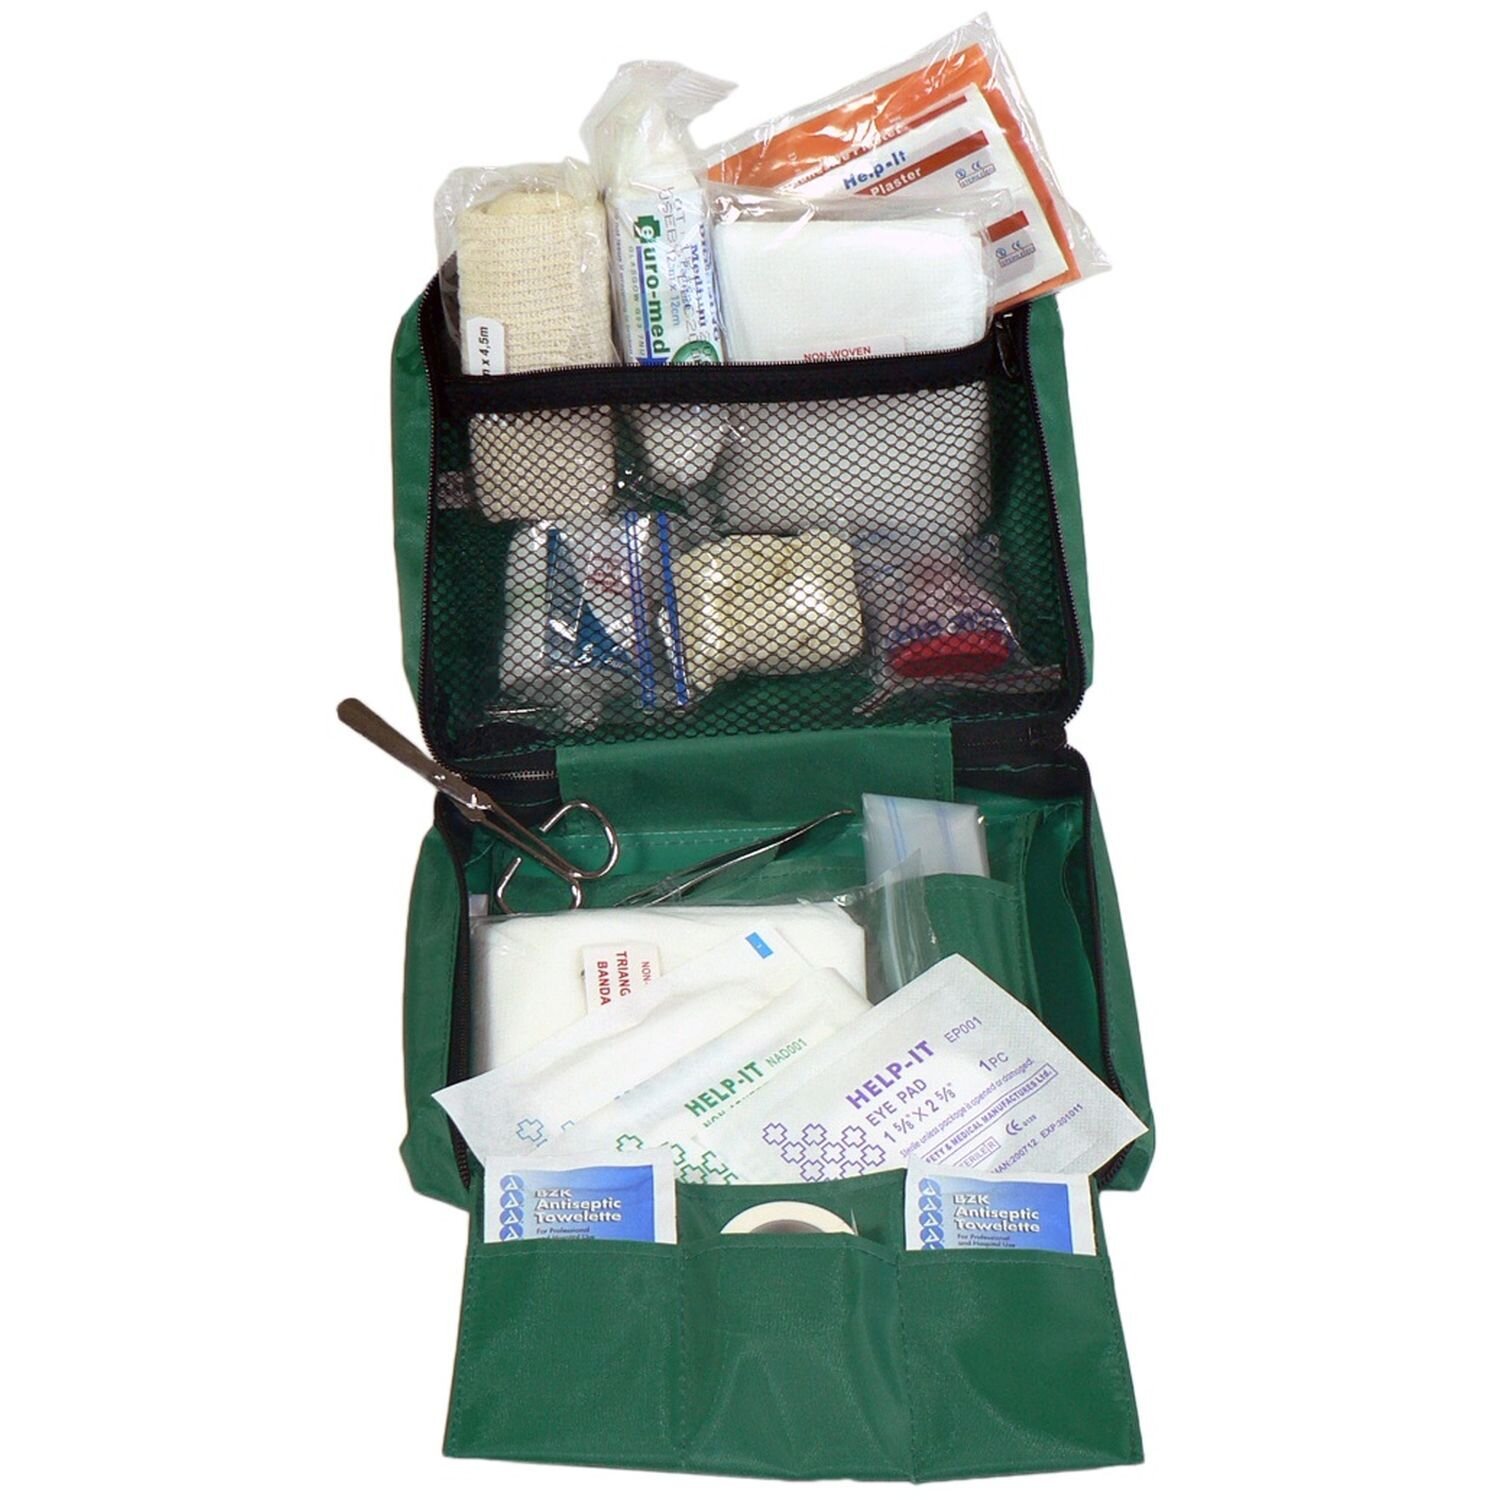 Lone Worker 1 / Vehicle First Aid Kit